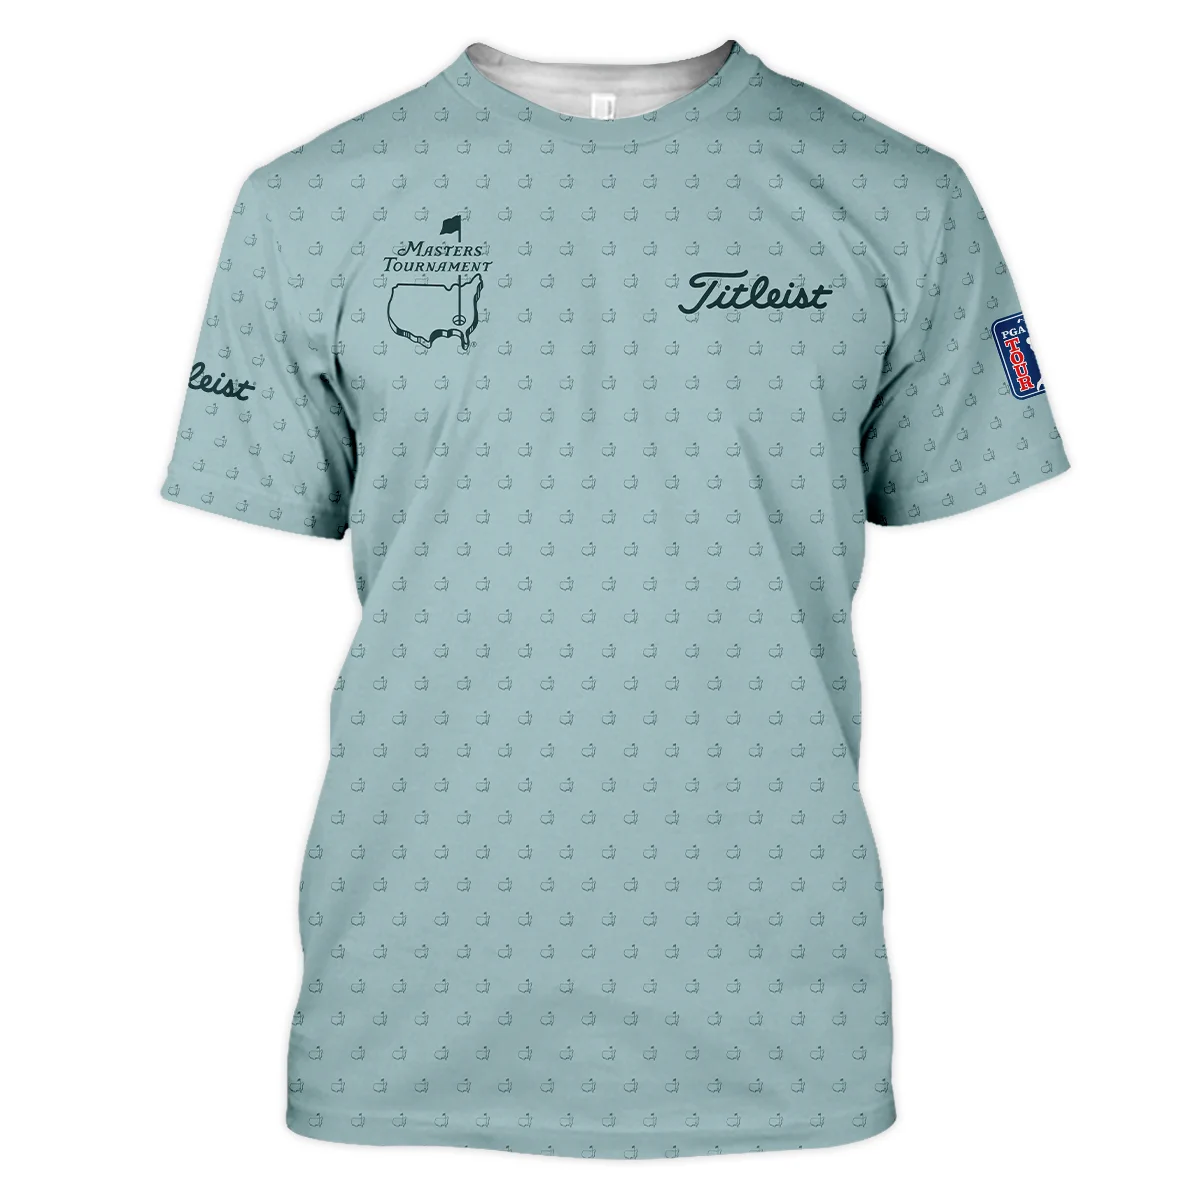 Golf Pattern Masters Tournament Titleist Polo Shirt Cyan Pattern All Over Print Polo Shirt For Men